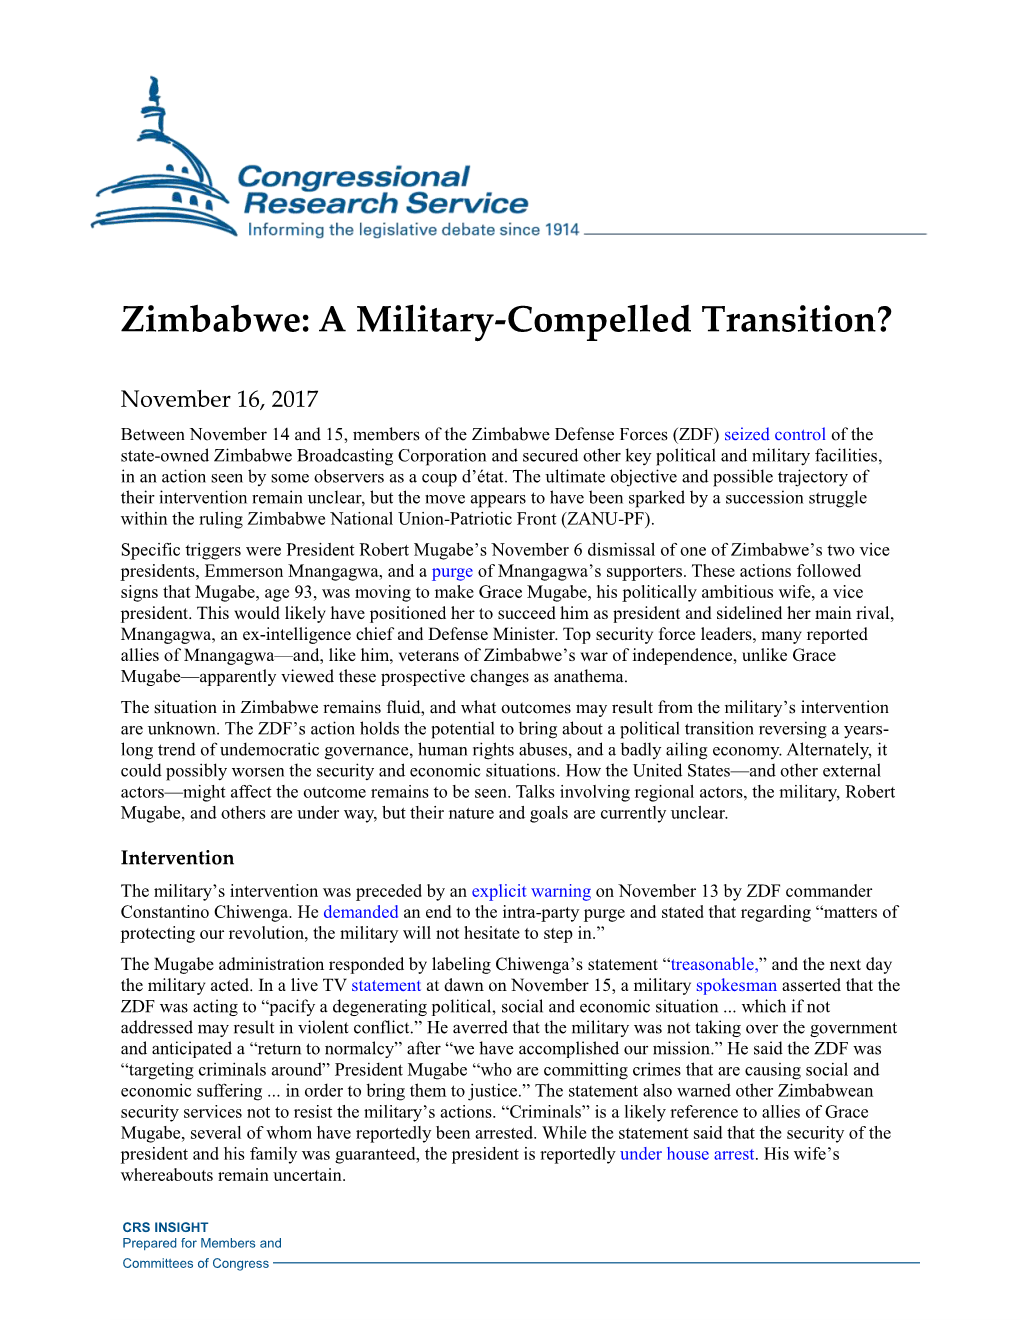 Zimbabwe: a Military-Compelled Transition?